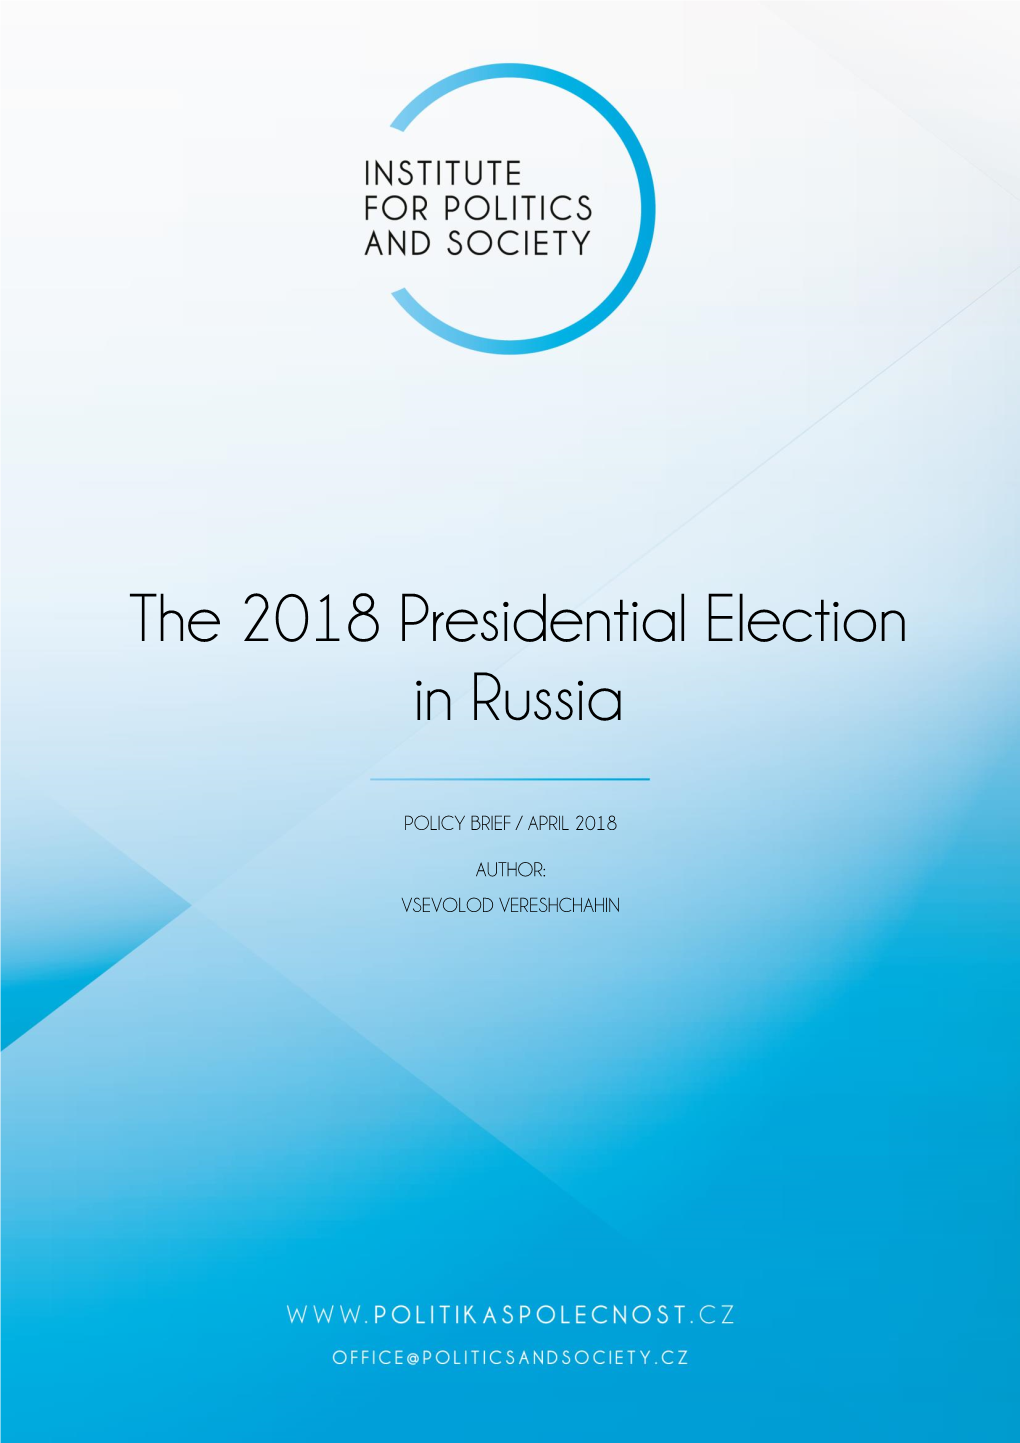 The 2018 Presidential Election in Russia